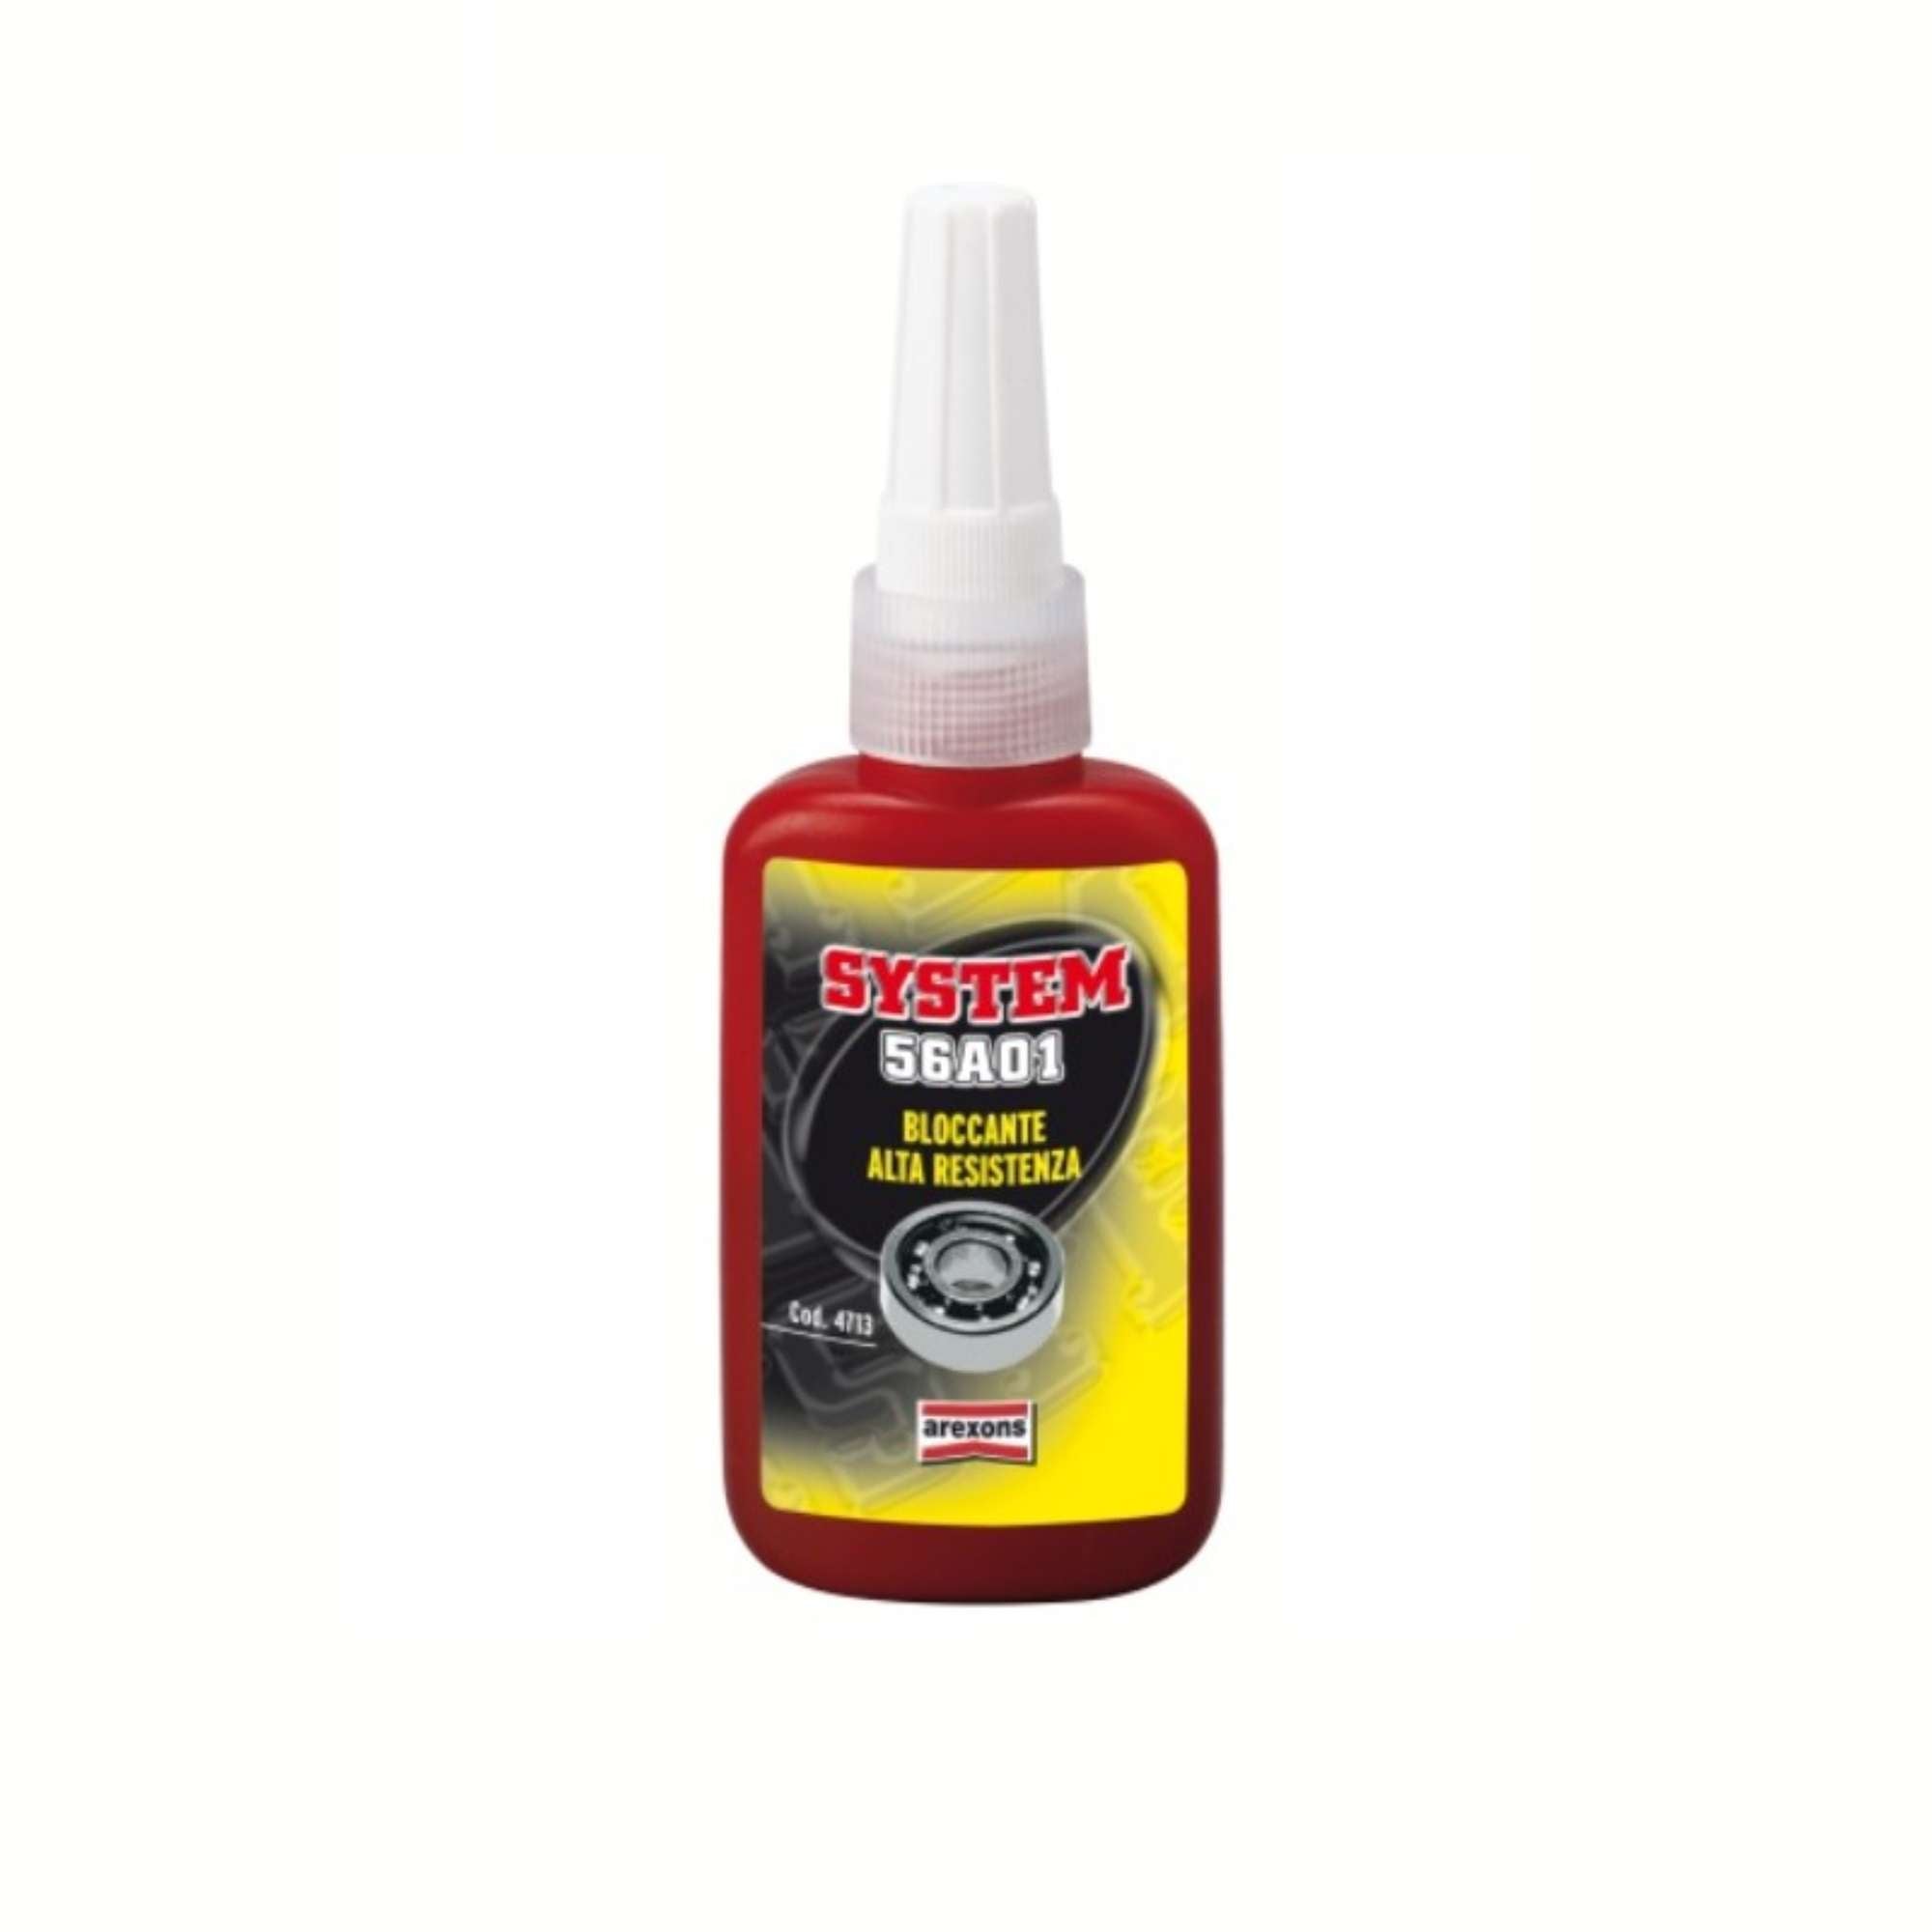 High-strength blocking agent 56A01 50ml - Arexons 4713